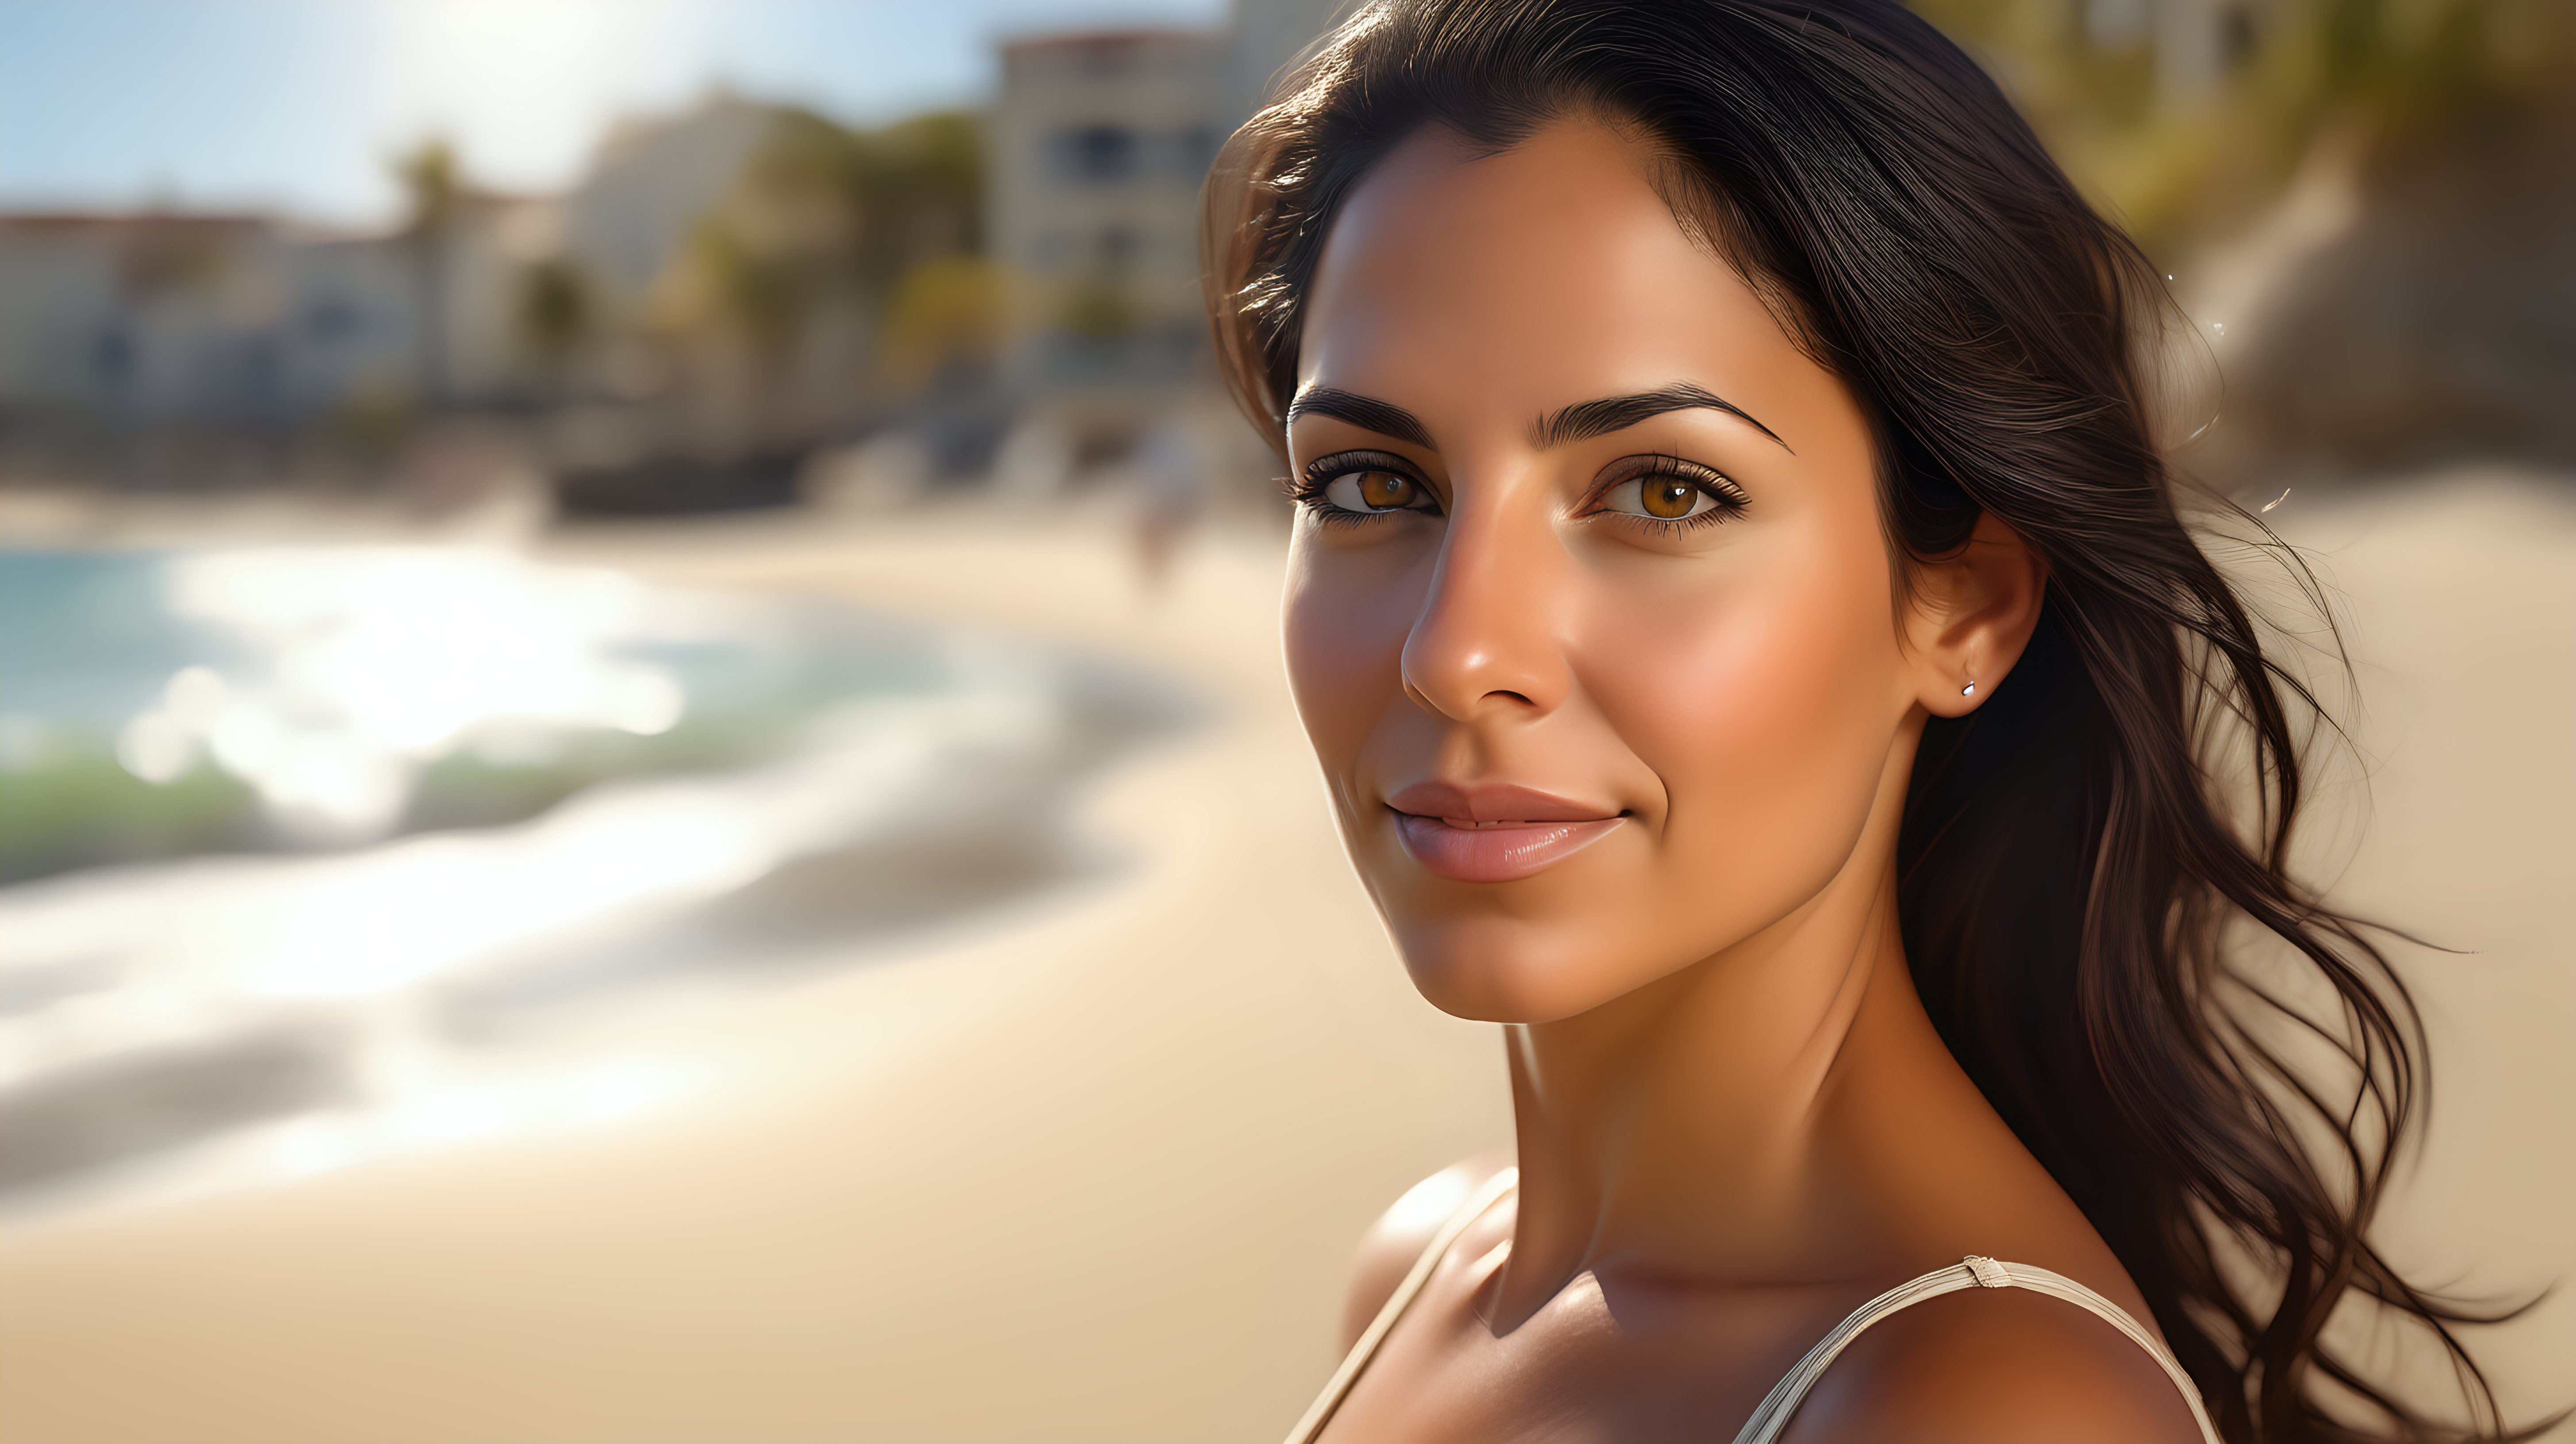 A 35 yo latin woman in a delightful afternoon. This portrait is the best representation of female beauty, shiny dark hair, hazel eyes, perfect olive skin ina beach, Extremely realistic textures and warm colors give the final touch. Sharp focus and realistic shadows add to the scene.